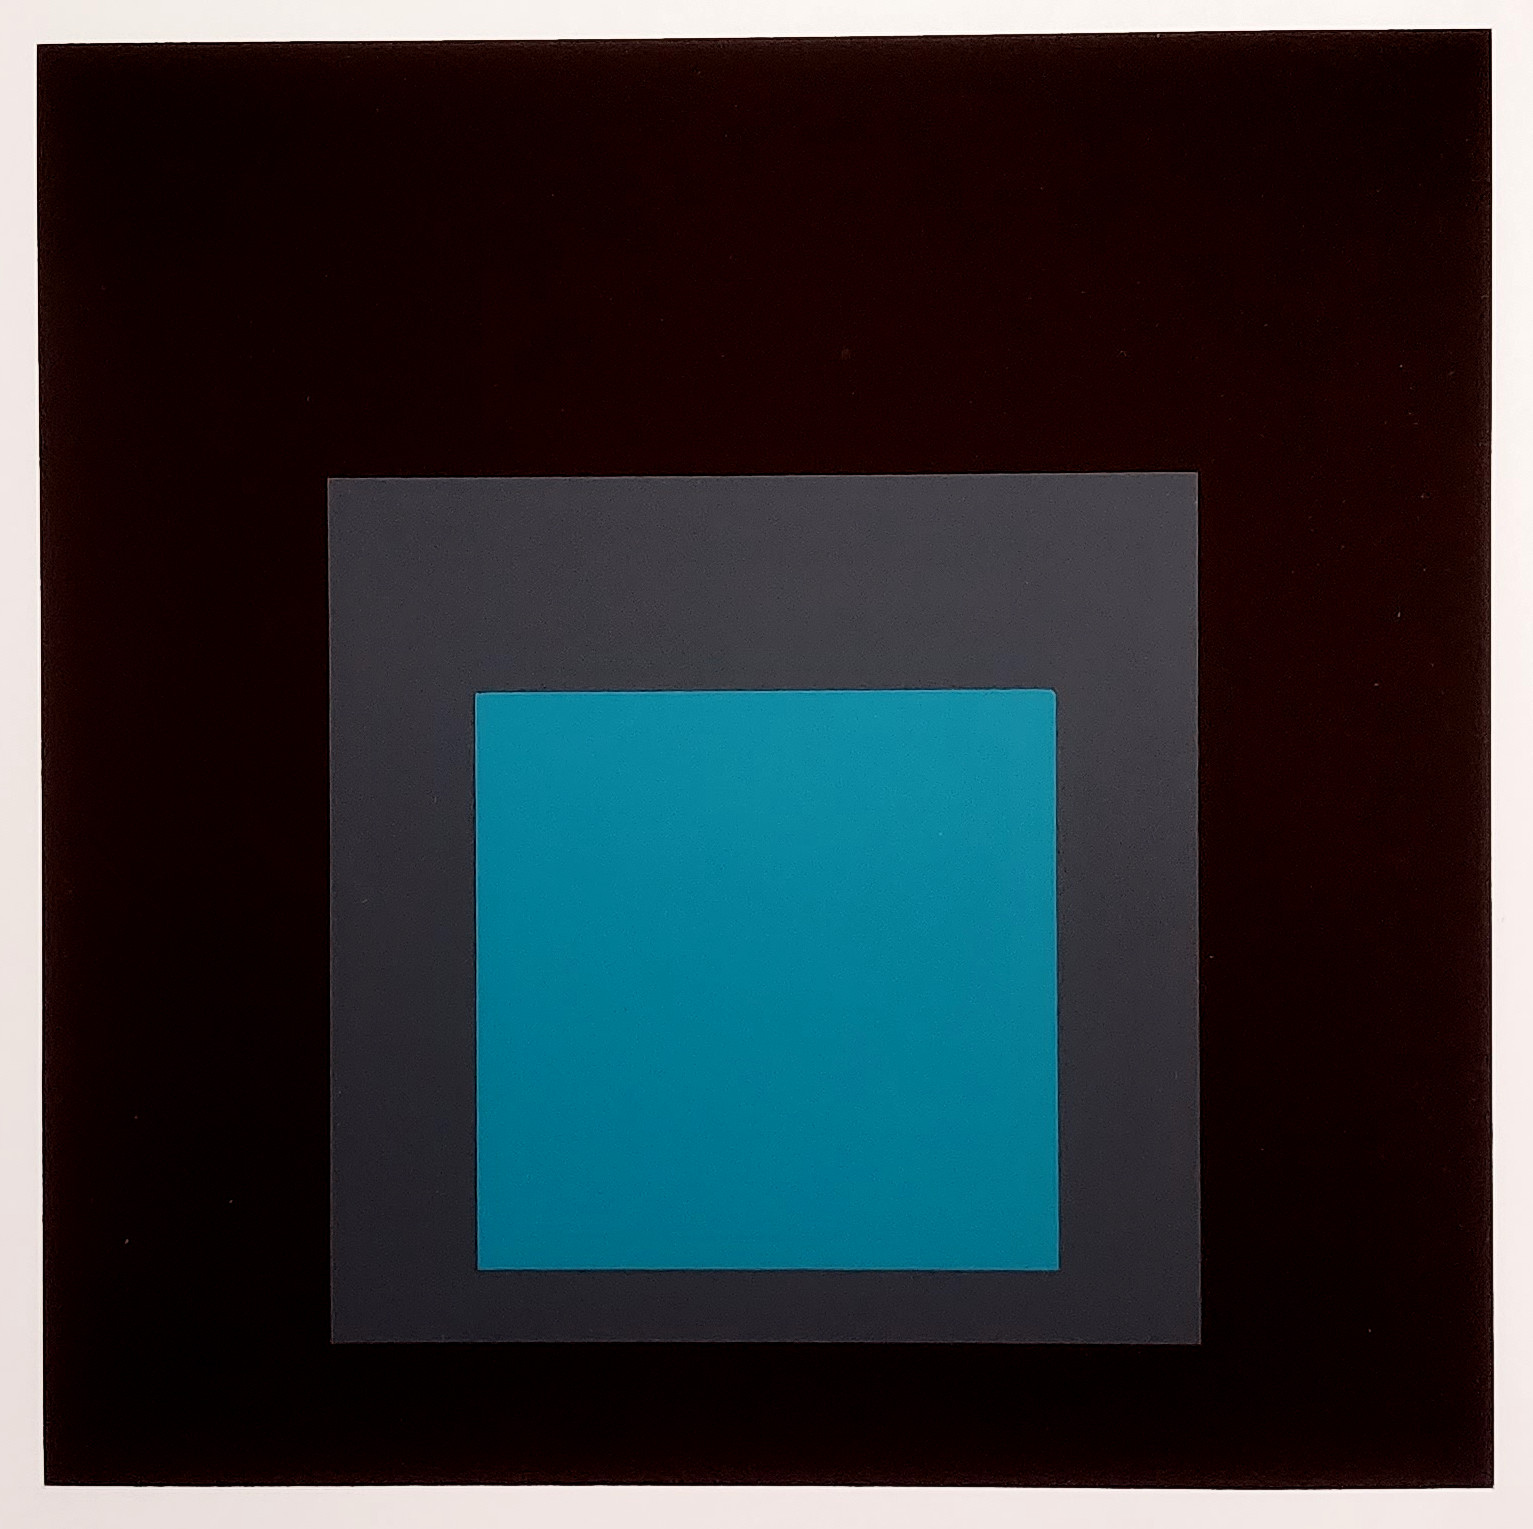 Homage to the Square: Set Off - Josef Albers